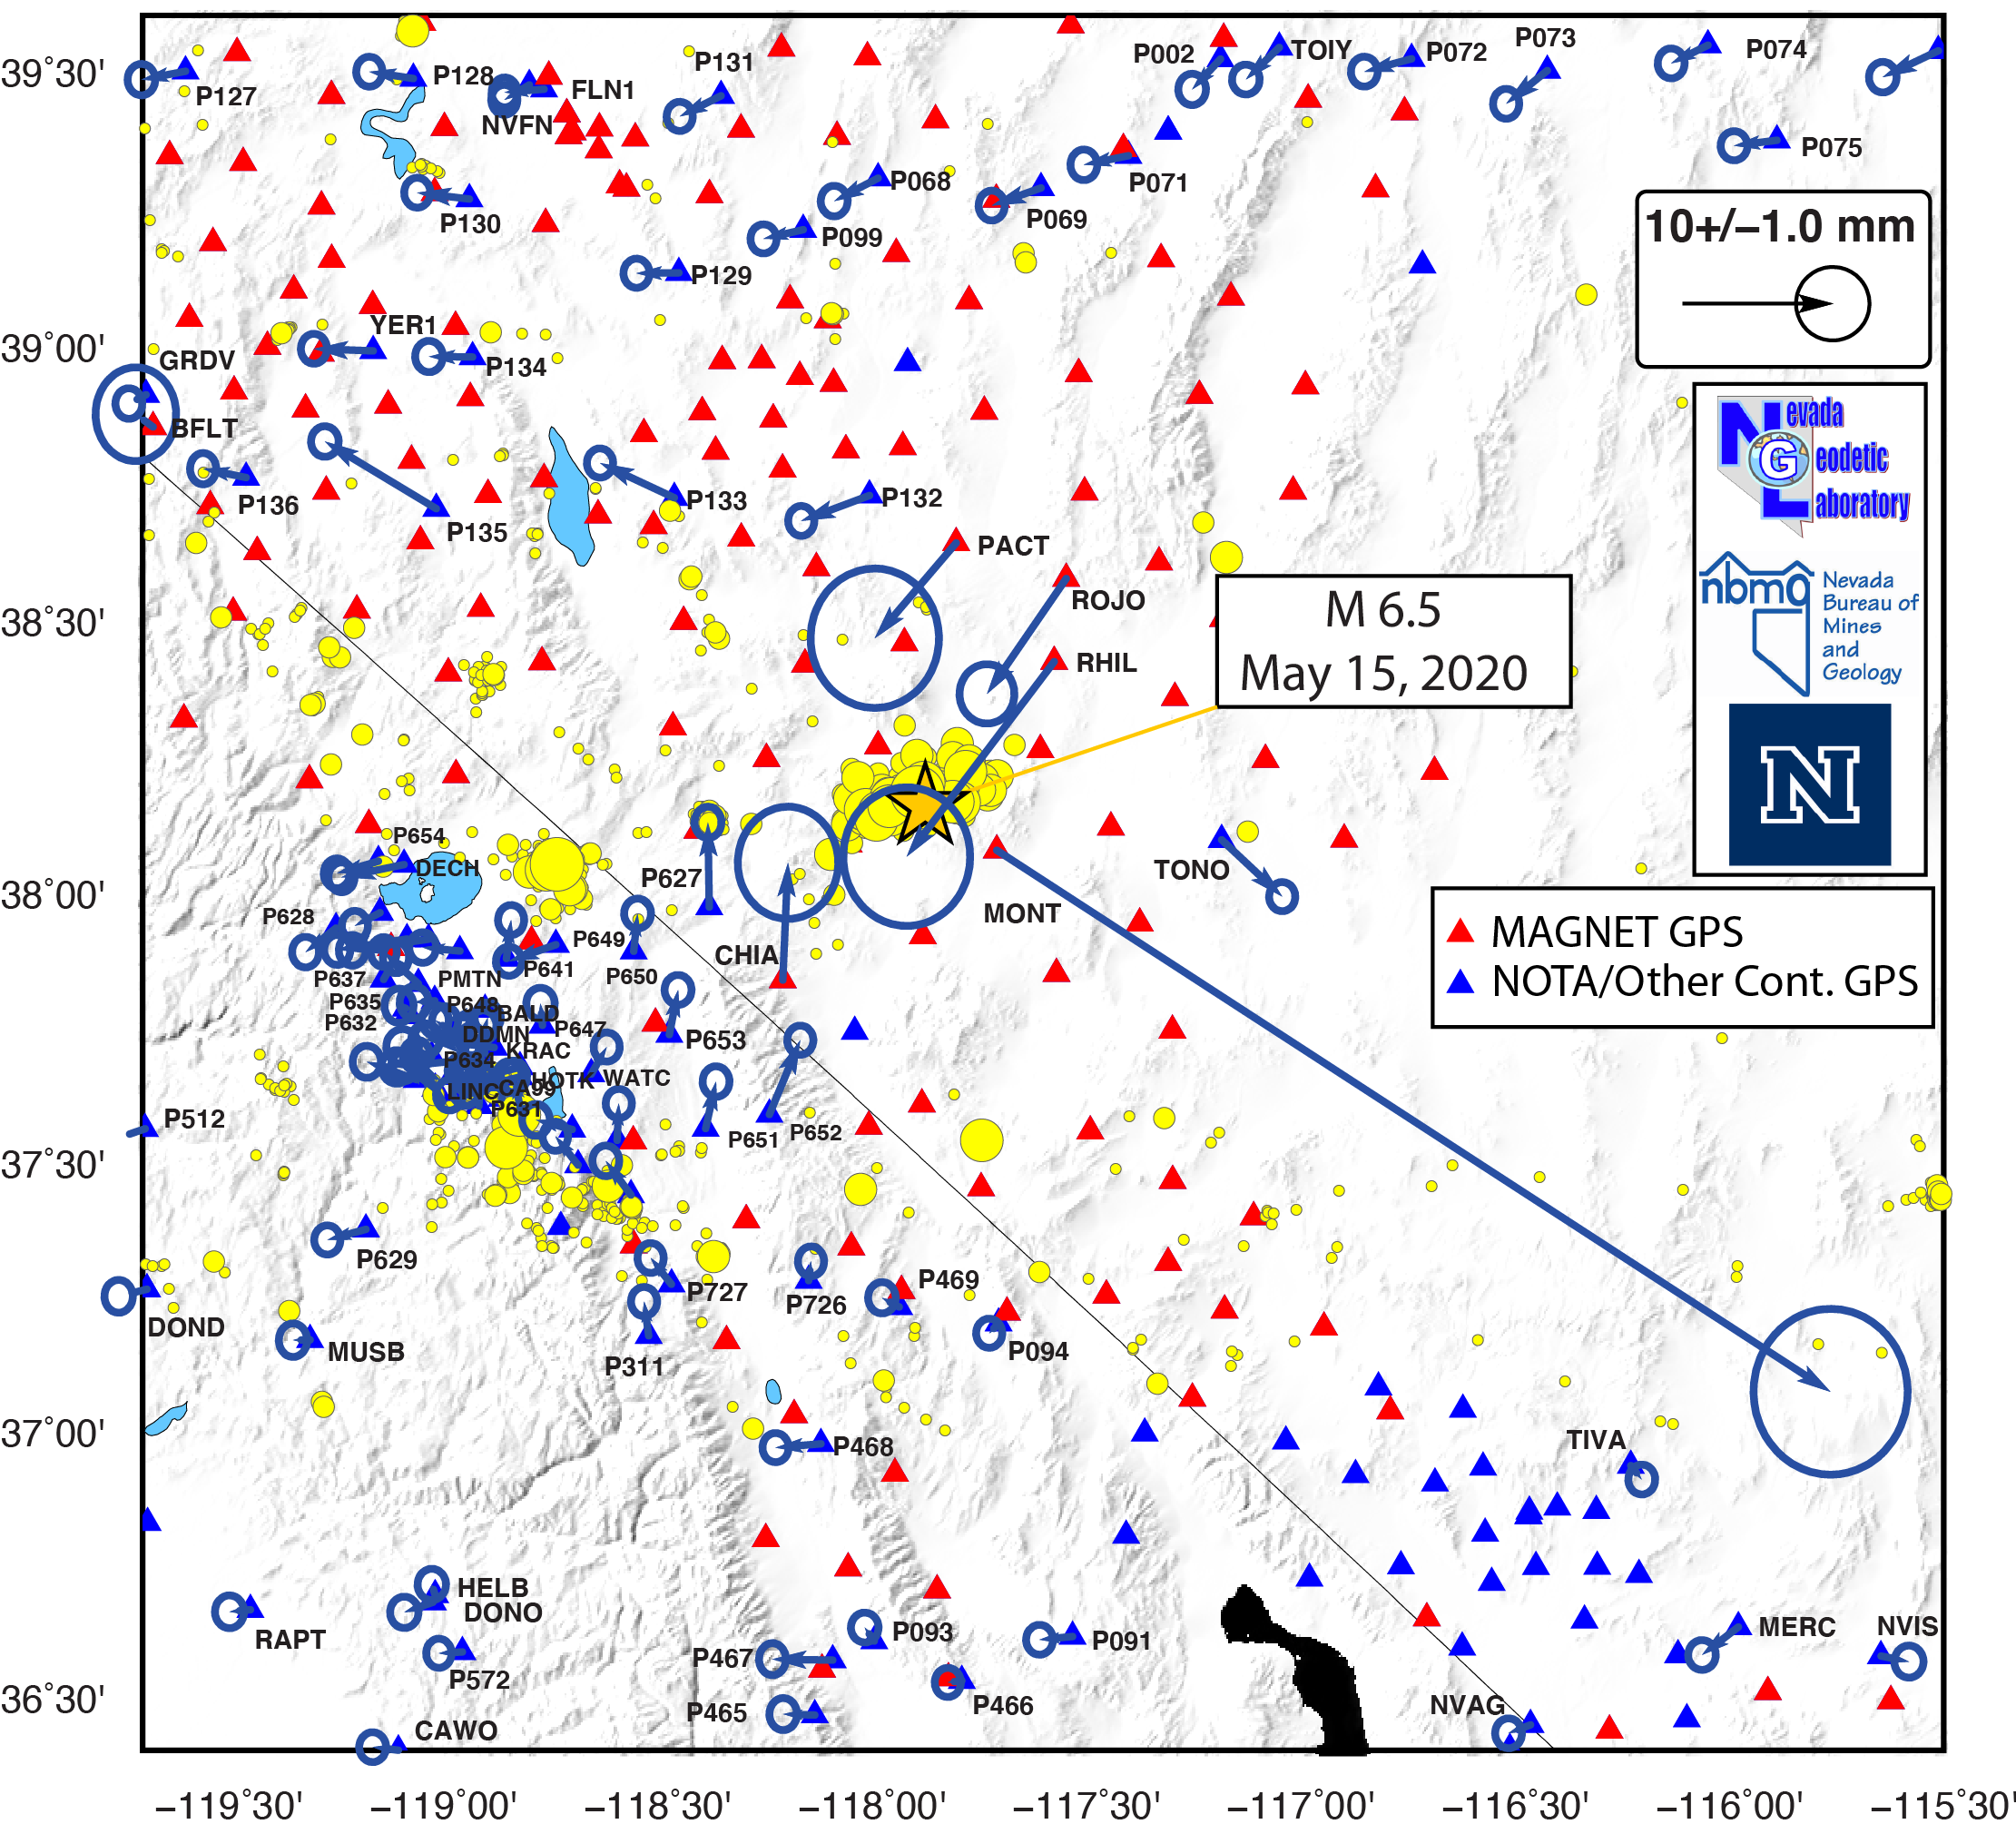 Map of Earthquakes and GPS displacements